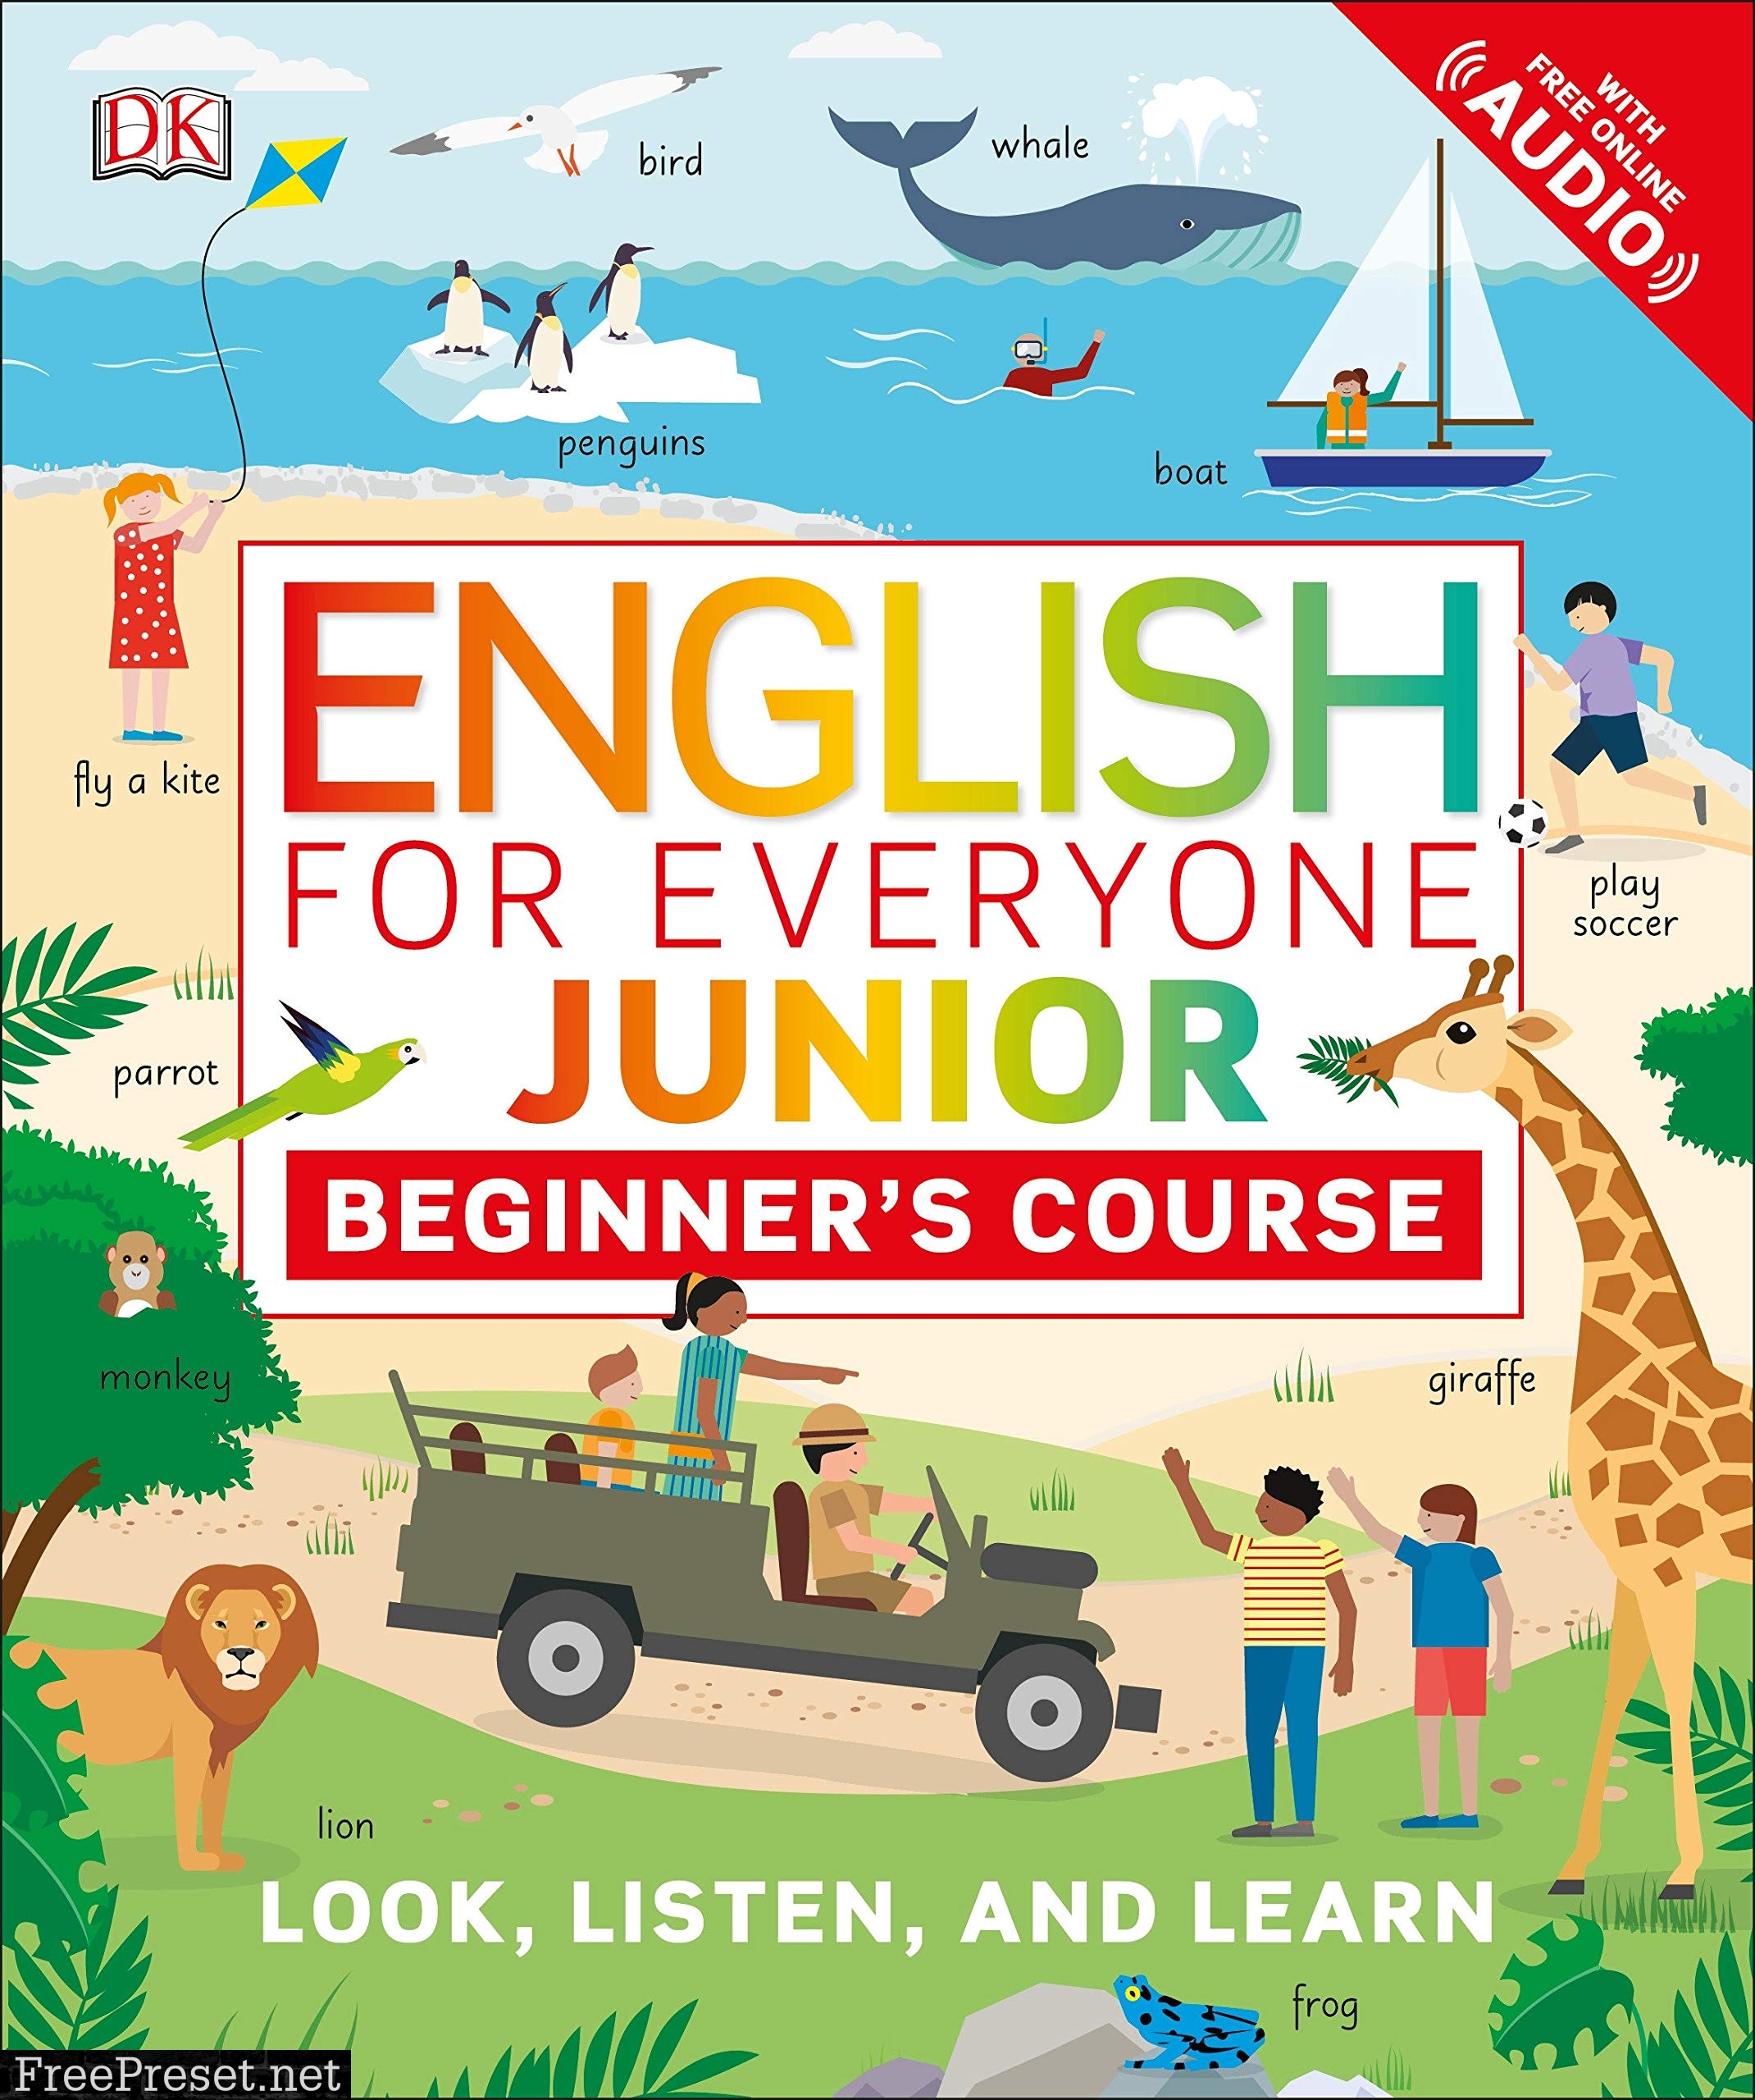 English for Everyone Book